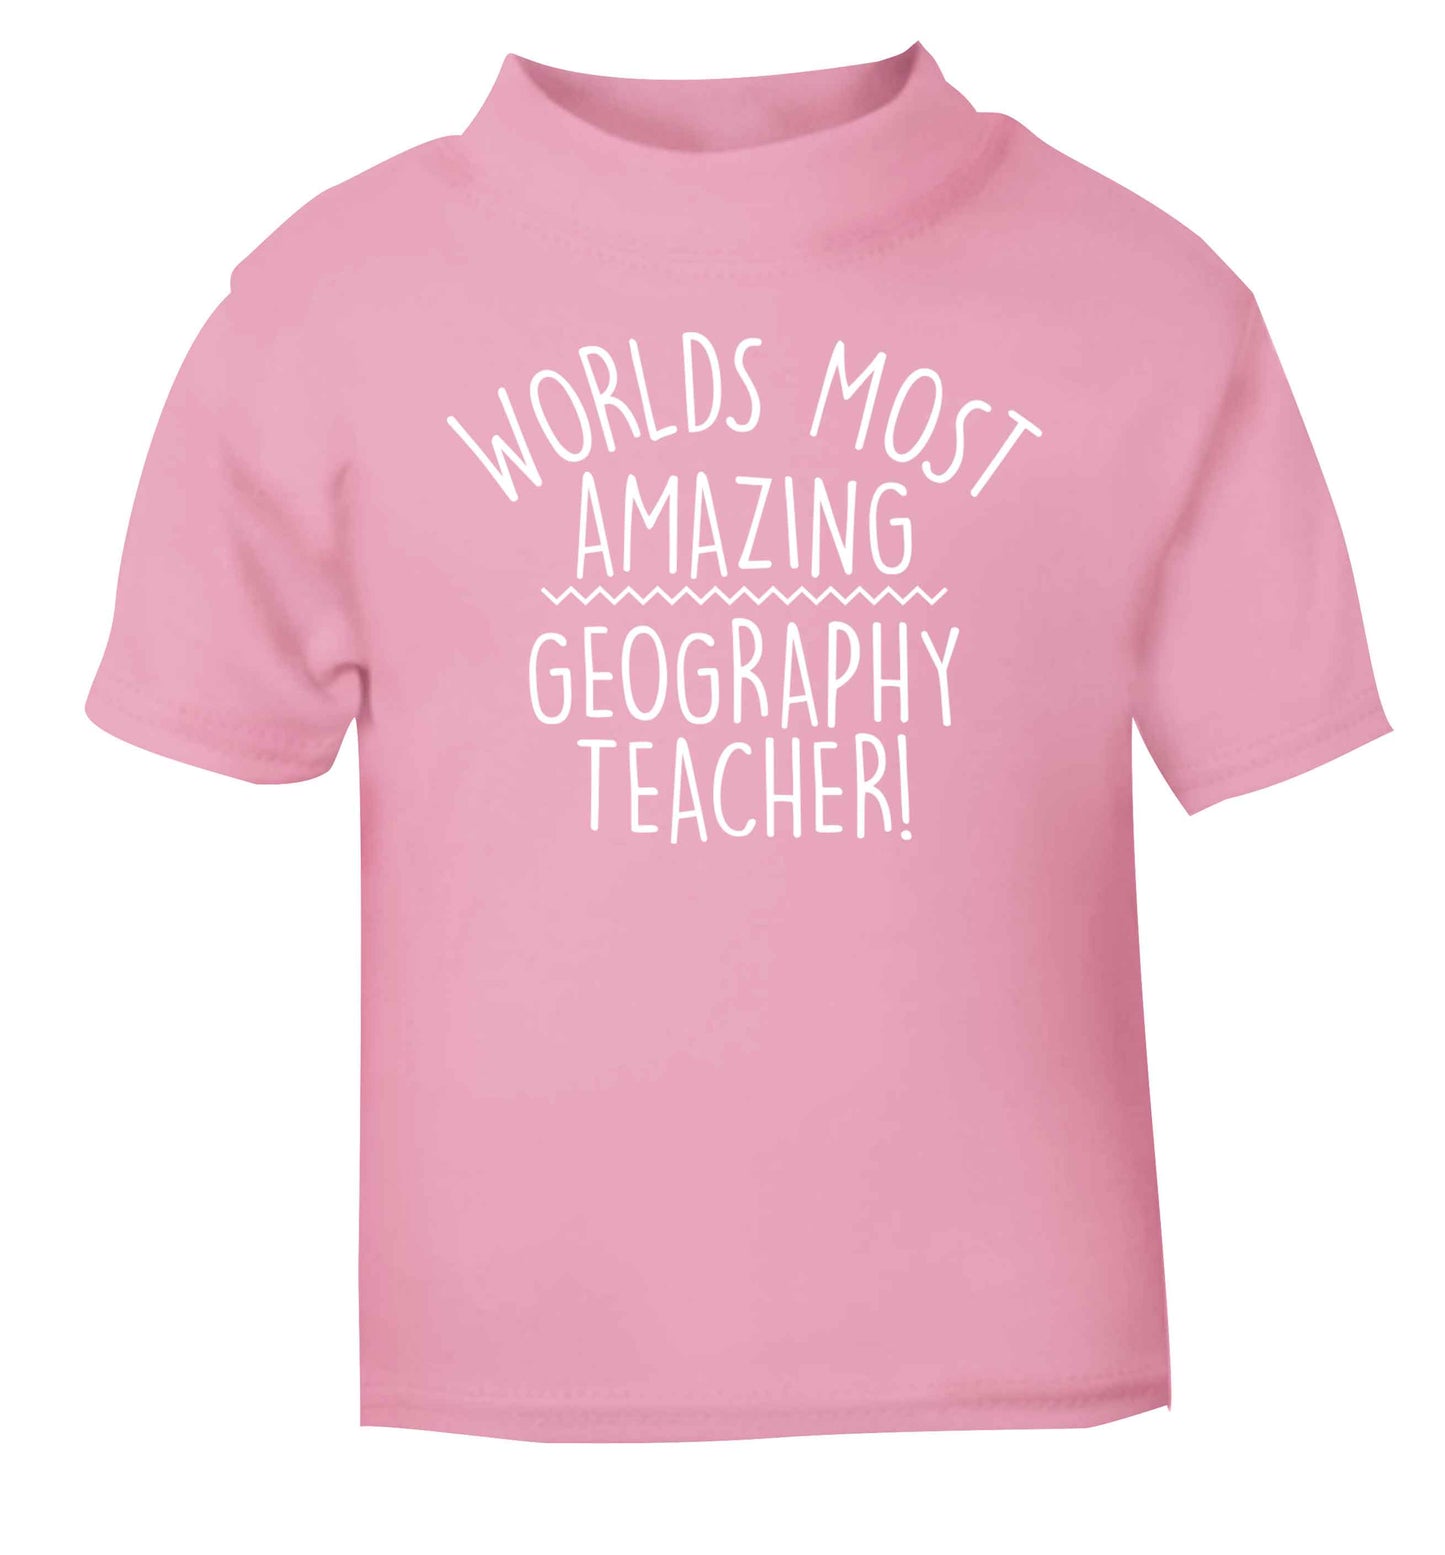 Worlds most amazing geography teacher light pink baby toddler Tshirt 2 Years